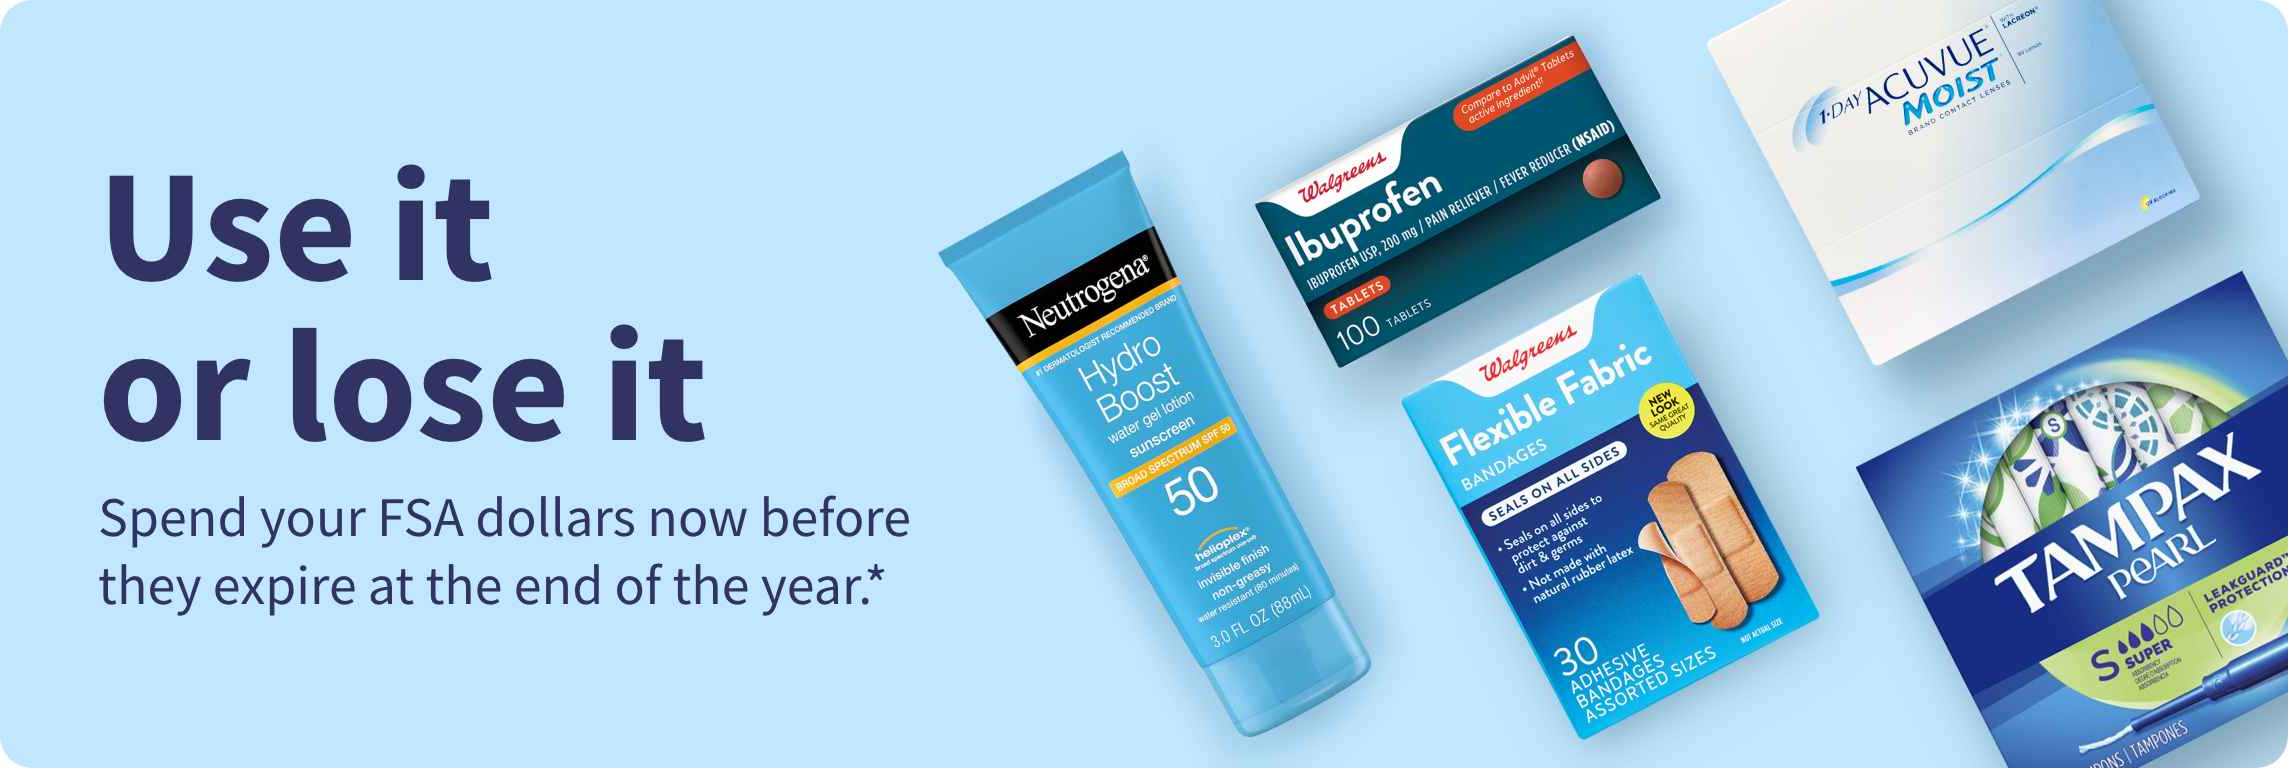 Walgreens – Save 25% on Eligible FSA Items! (Use it or Lose it!)